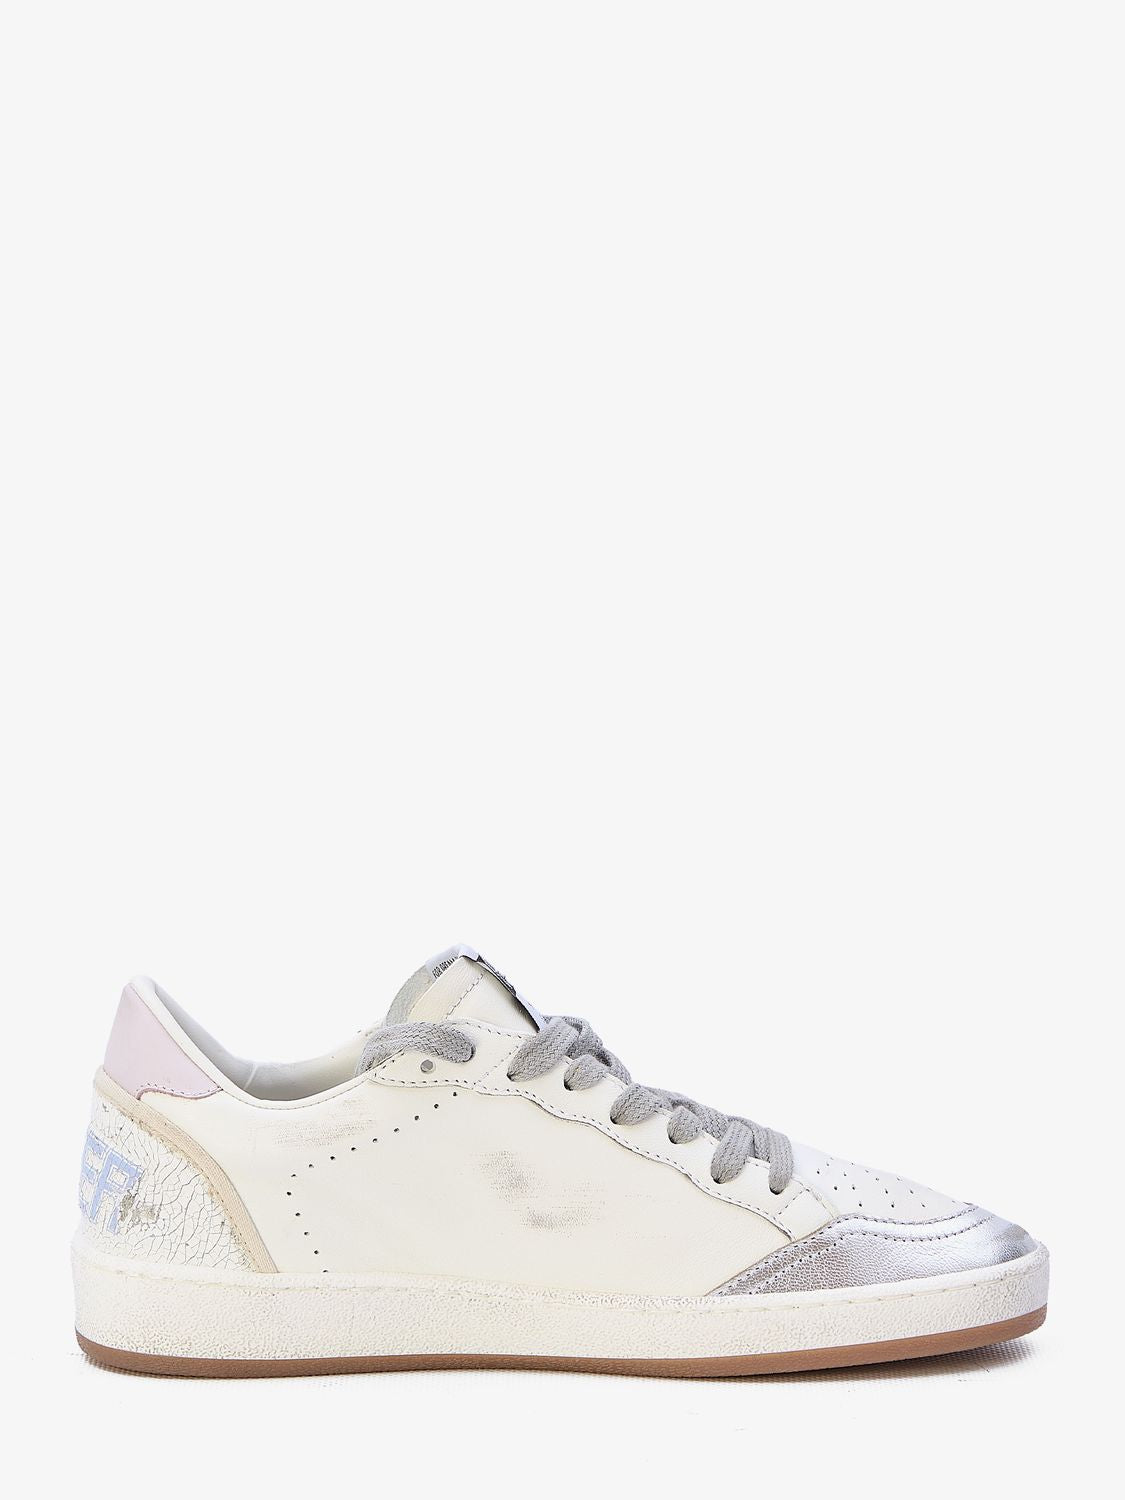 GOLDEN GOOSE Crystal Star Sneakers for Women in White, Silver, Aqua Gray, and Orchid Hush